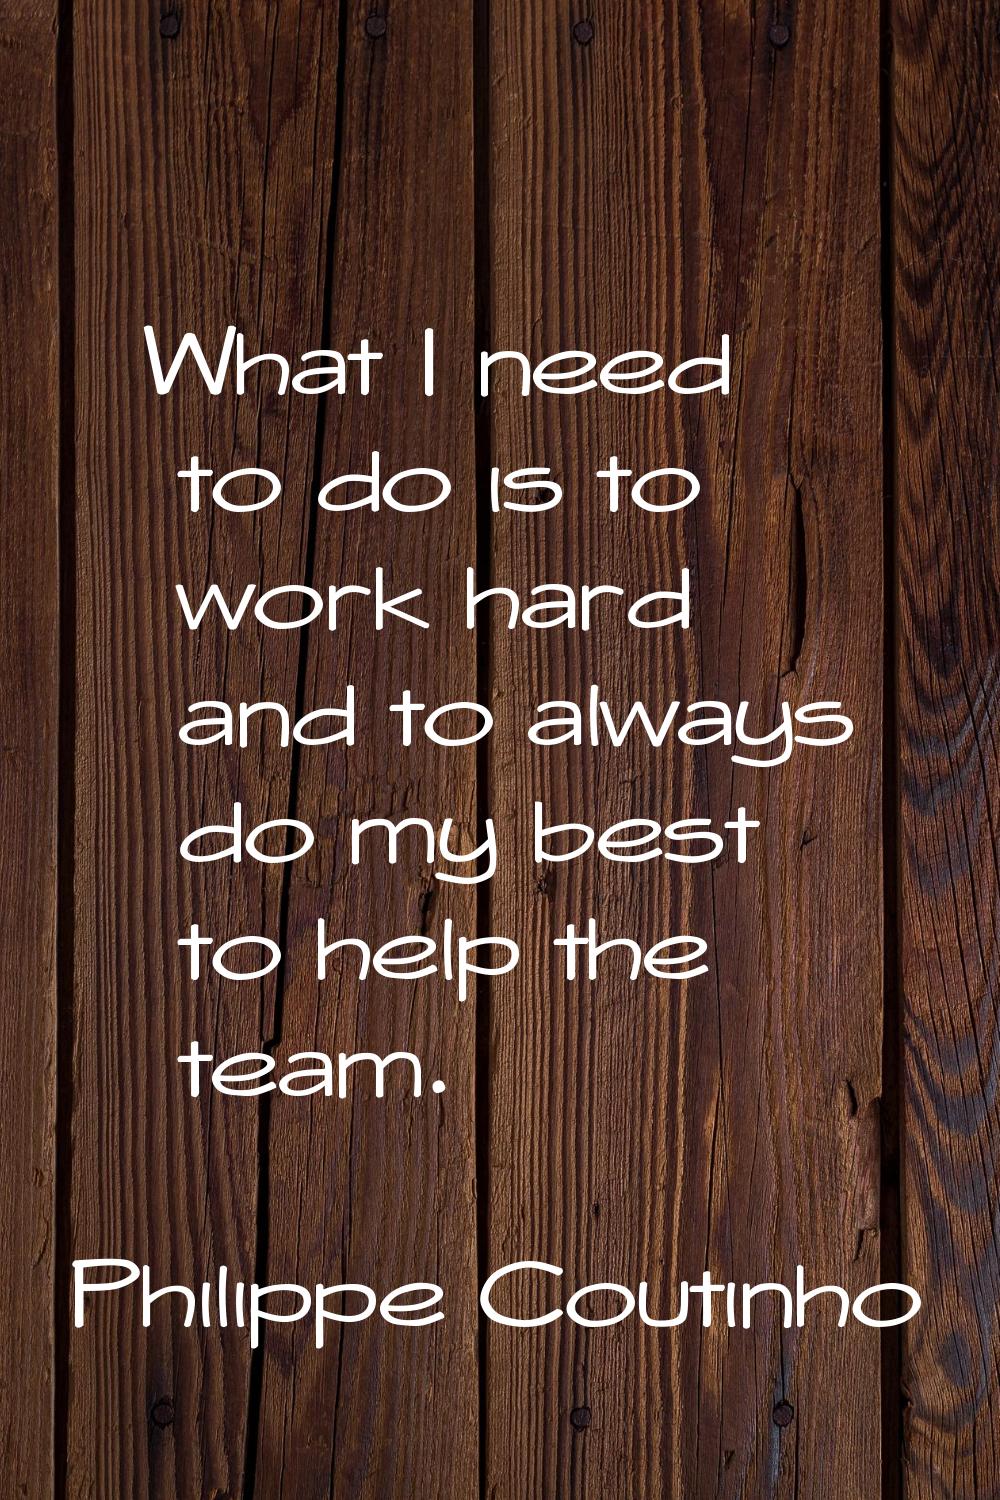 What I need to do is to work hard and to always do my best to help the team.